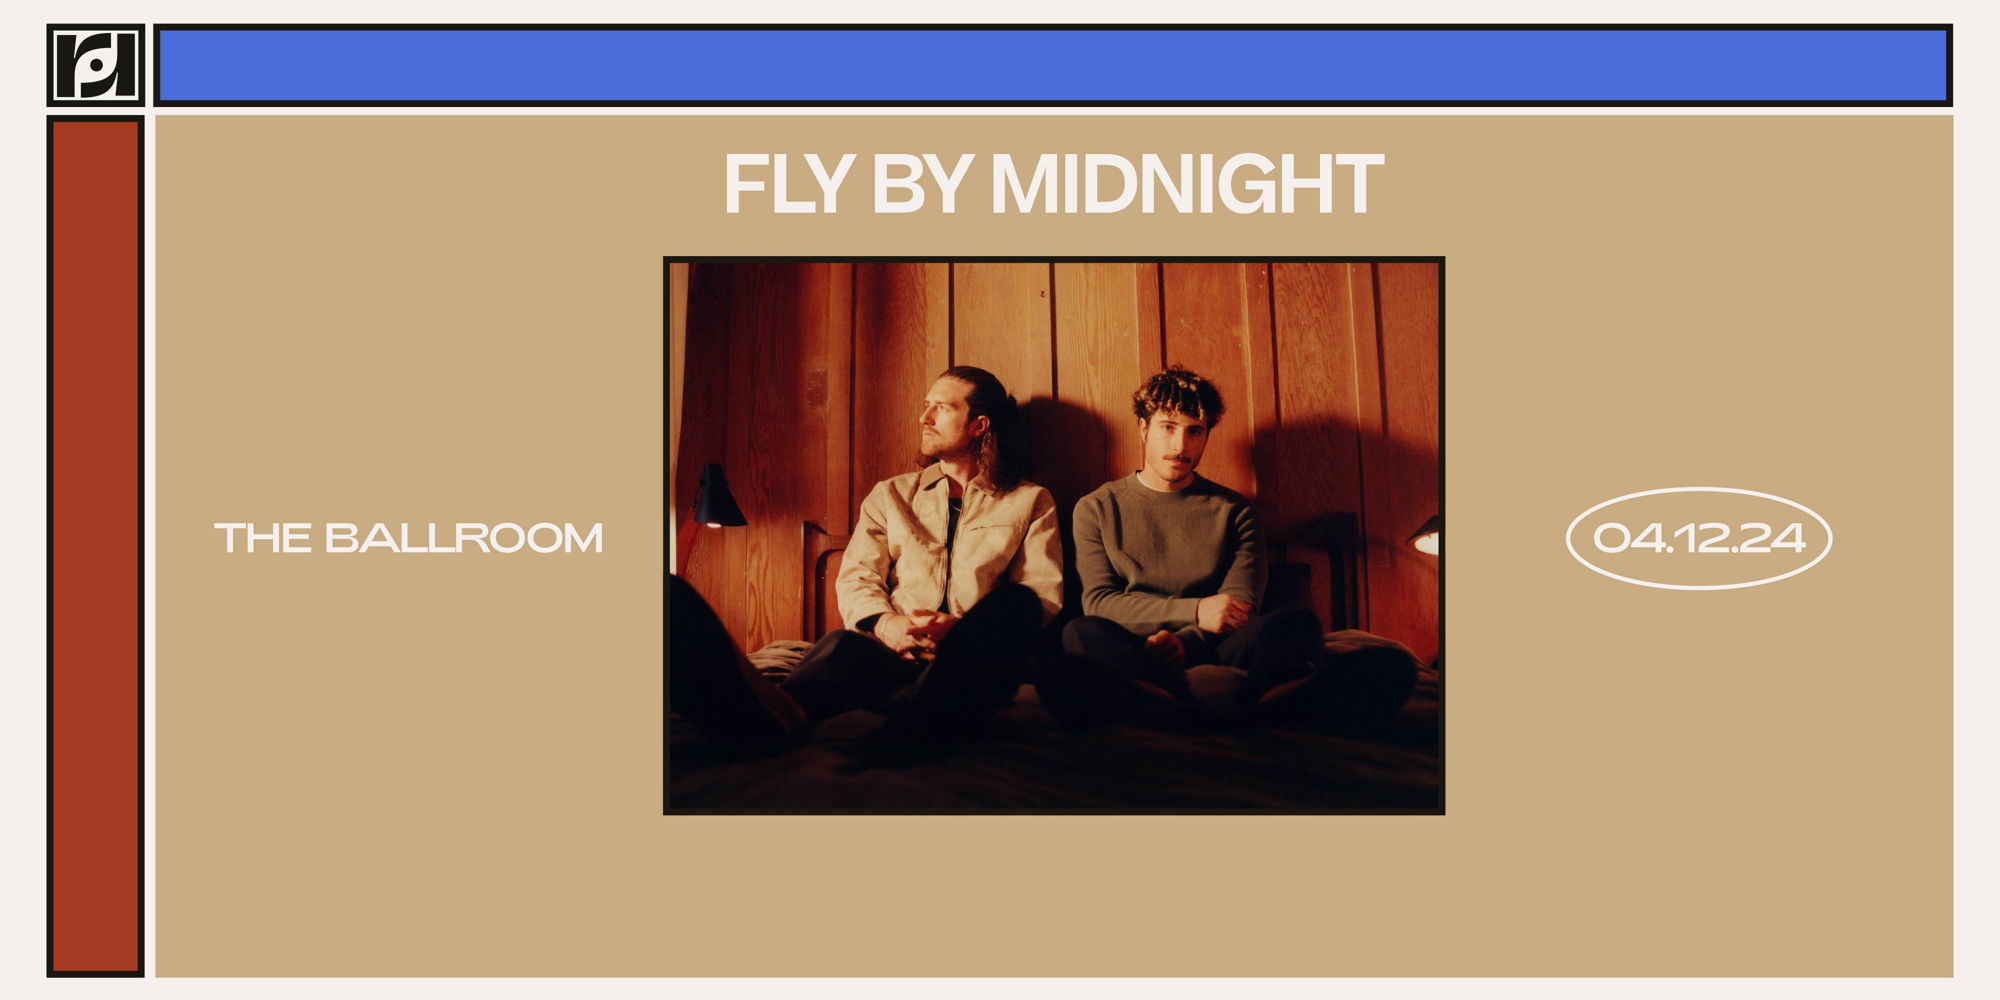 Resound Presents: Fly By Midnight at The Ballroom promotional image